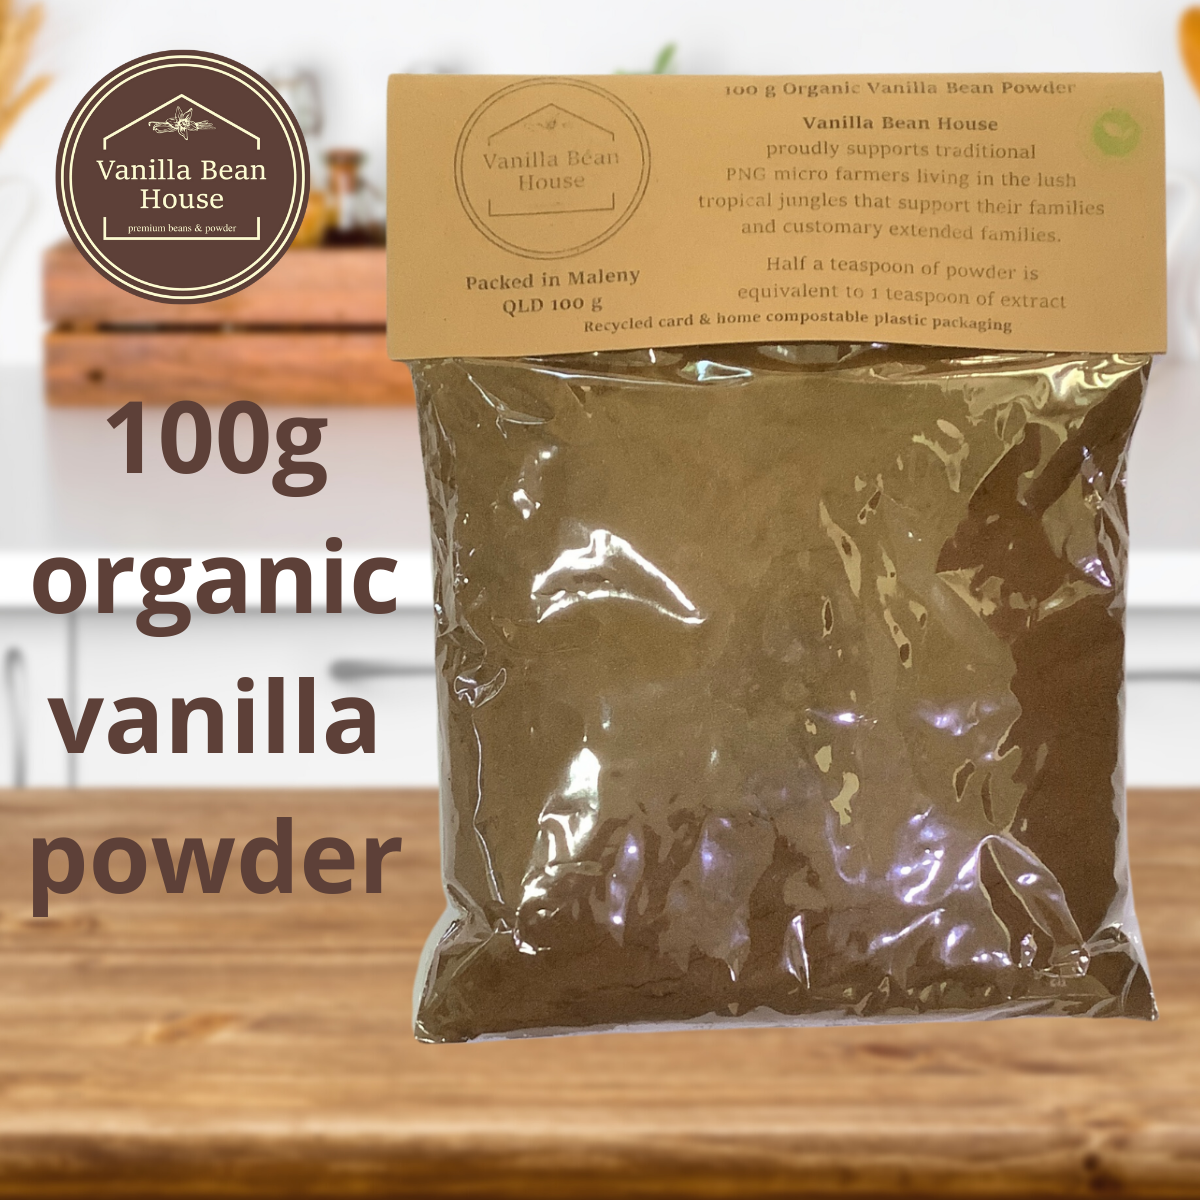 Vanilla Bean Powder - Organic 100g, eco-friendly recycled card and home-compostable packaging